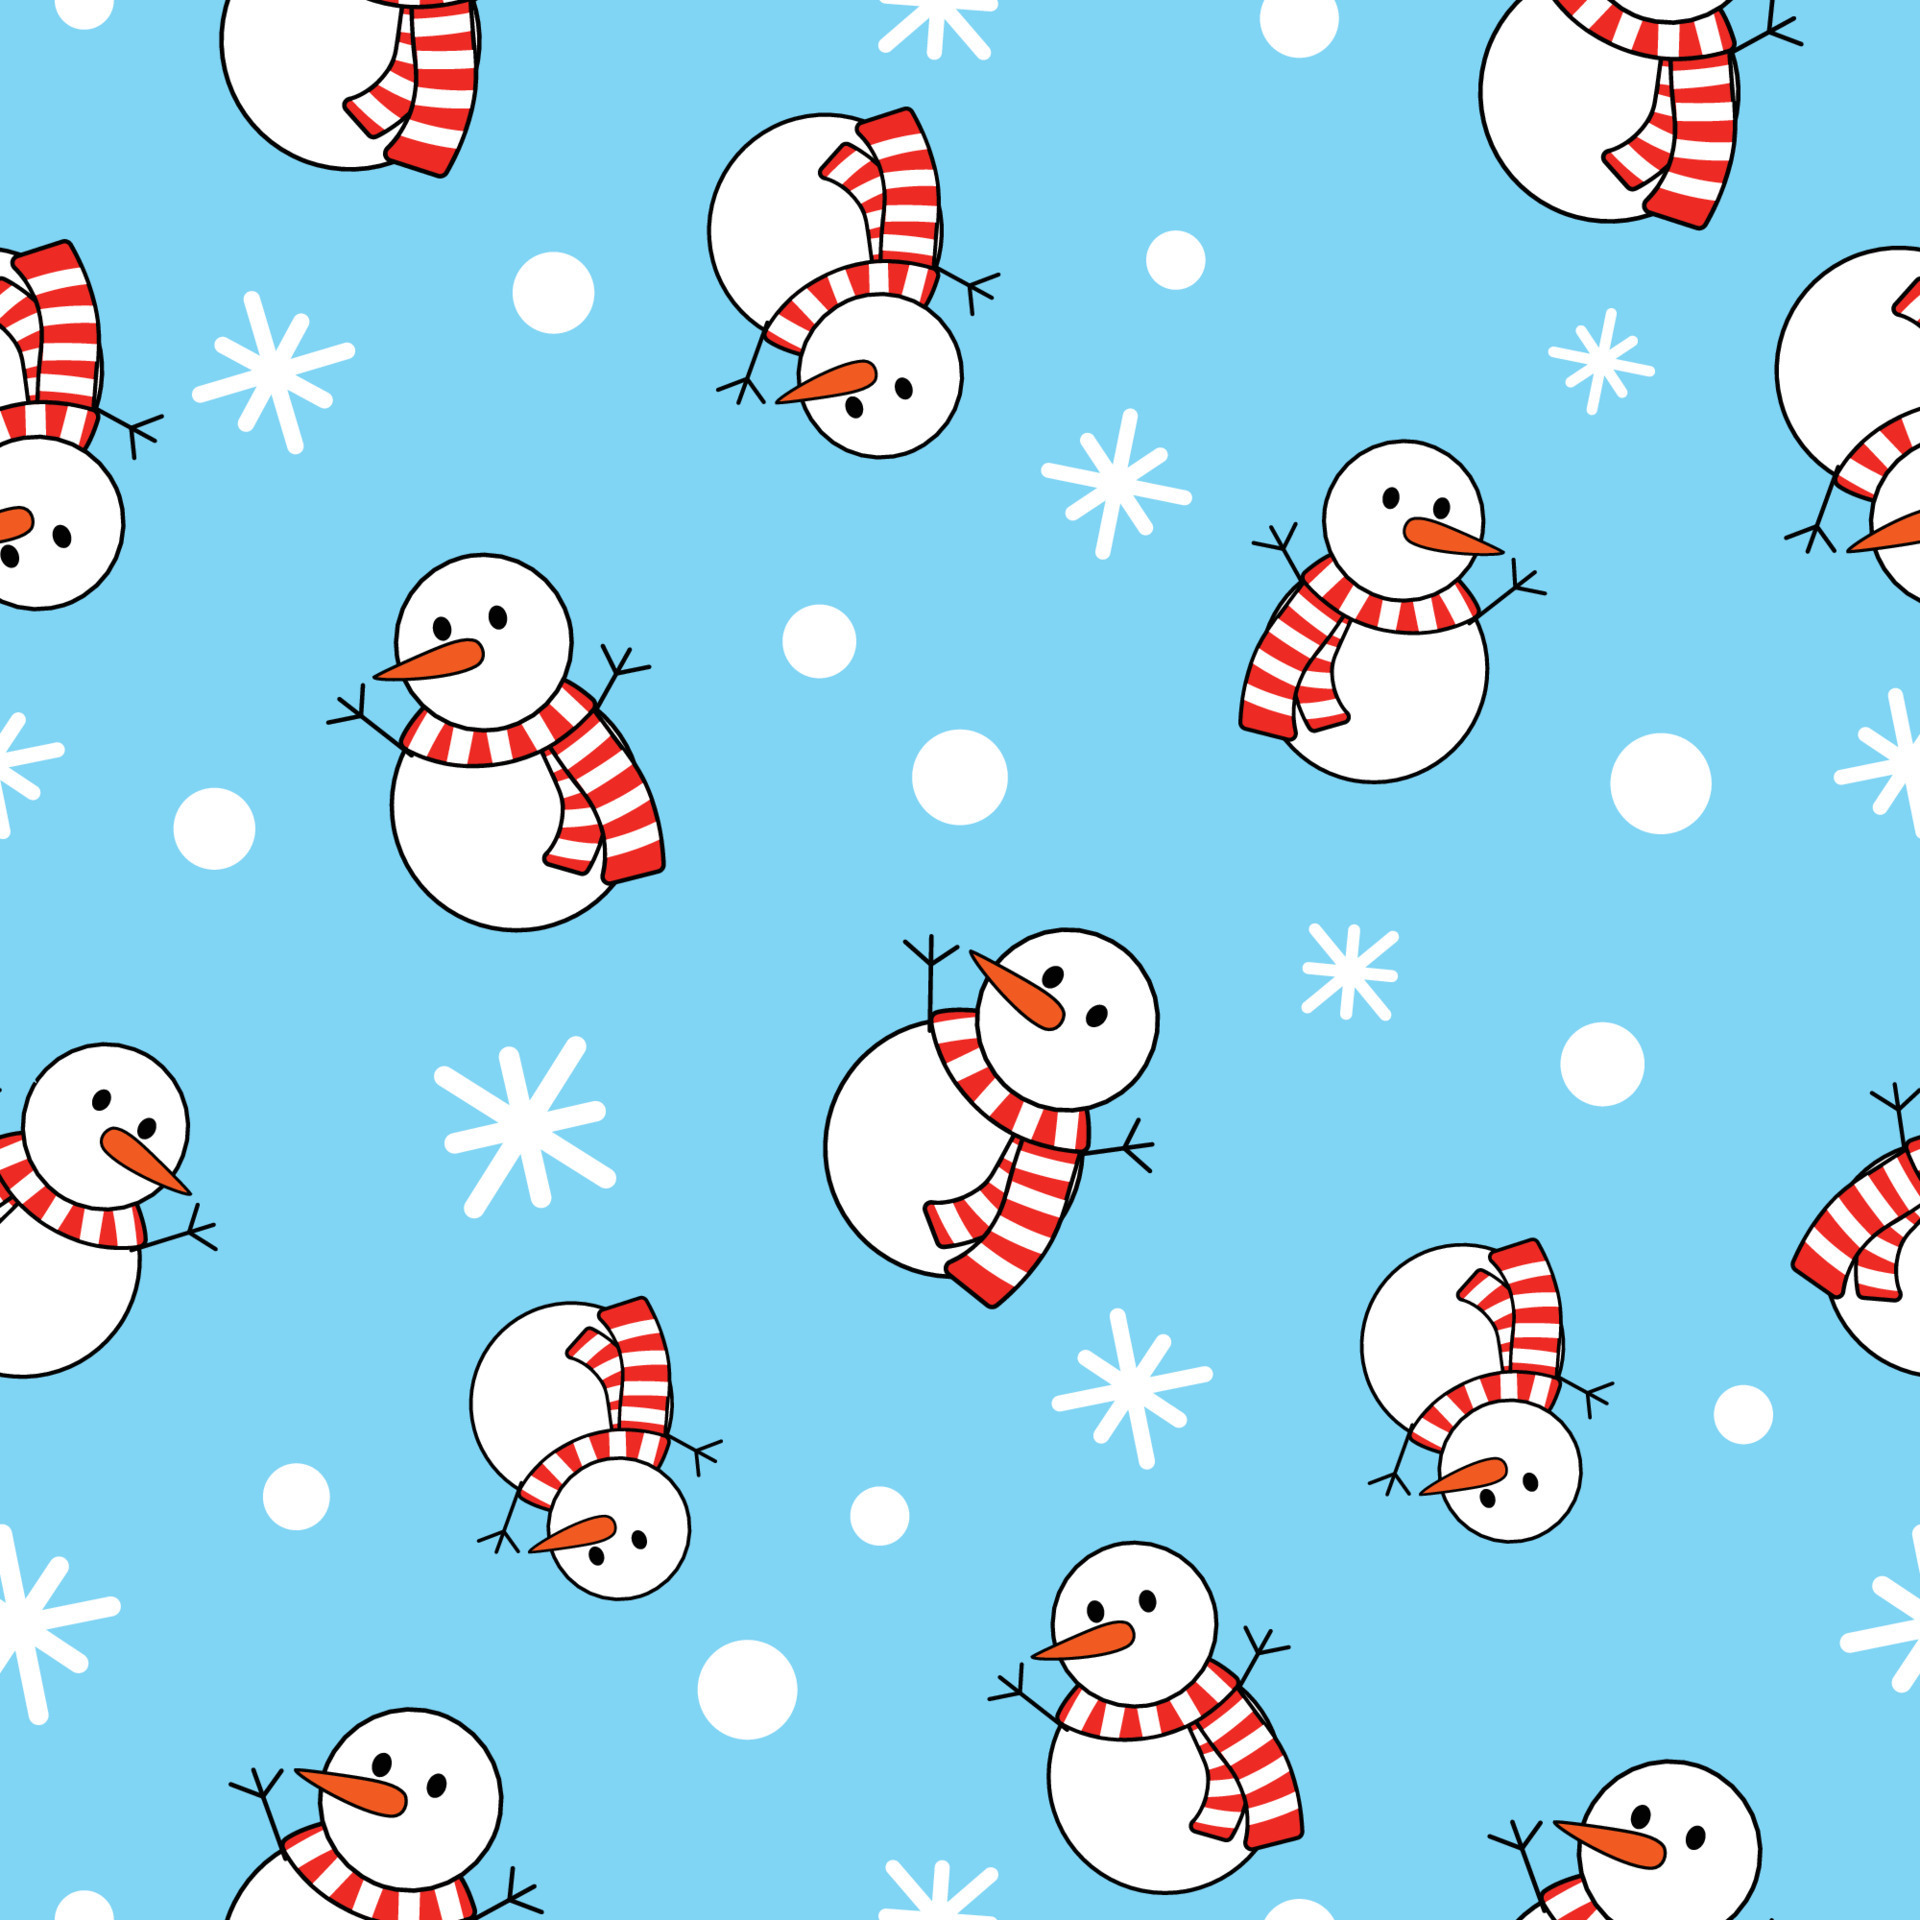 Snowman cartoon pattern seamless for wrapping paper, wallpaper